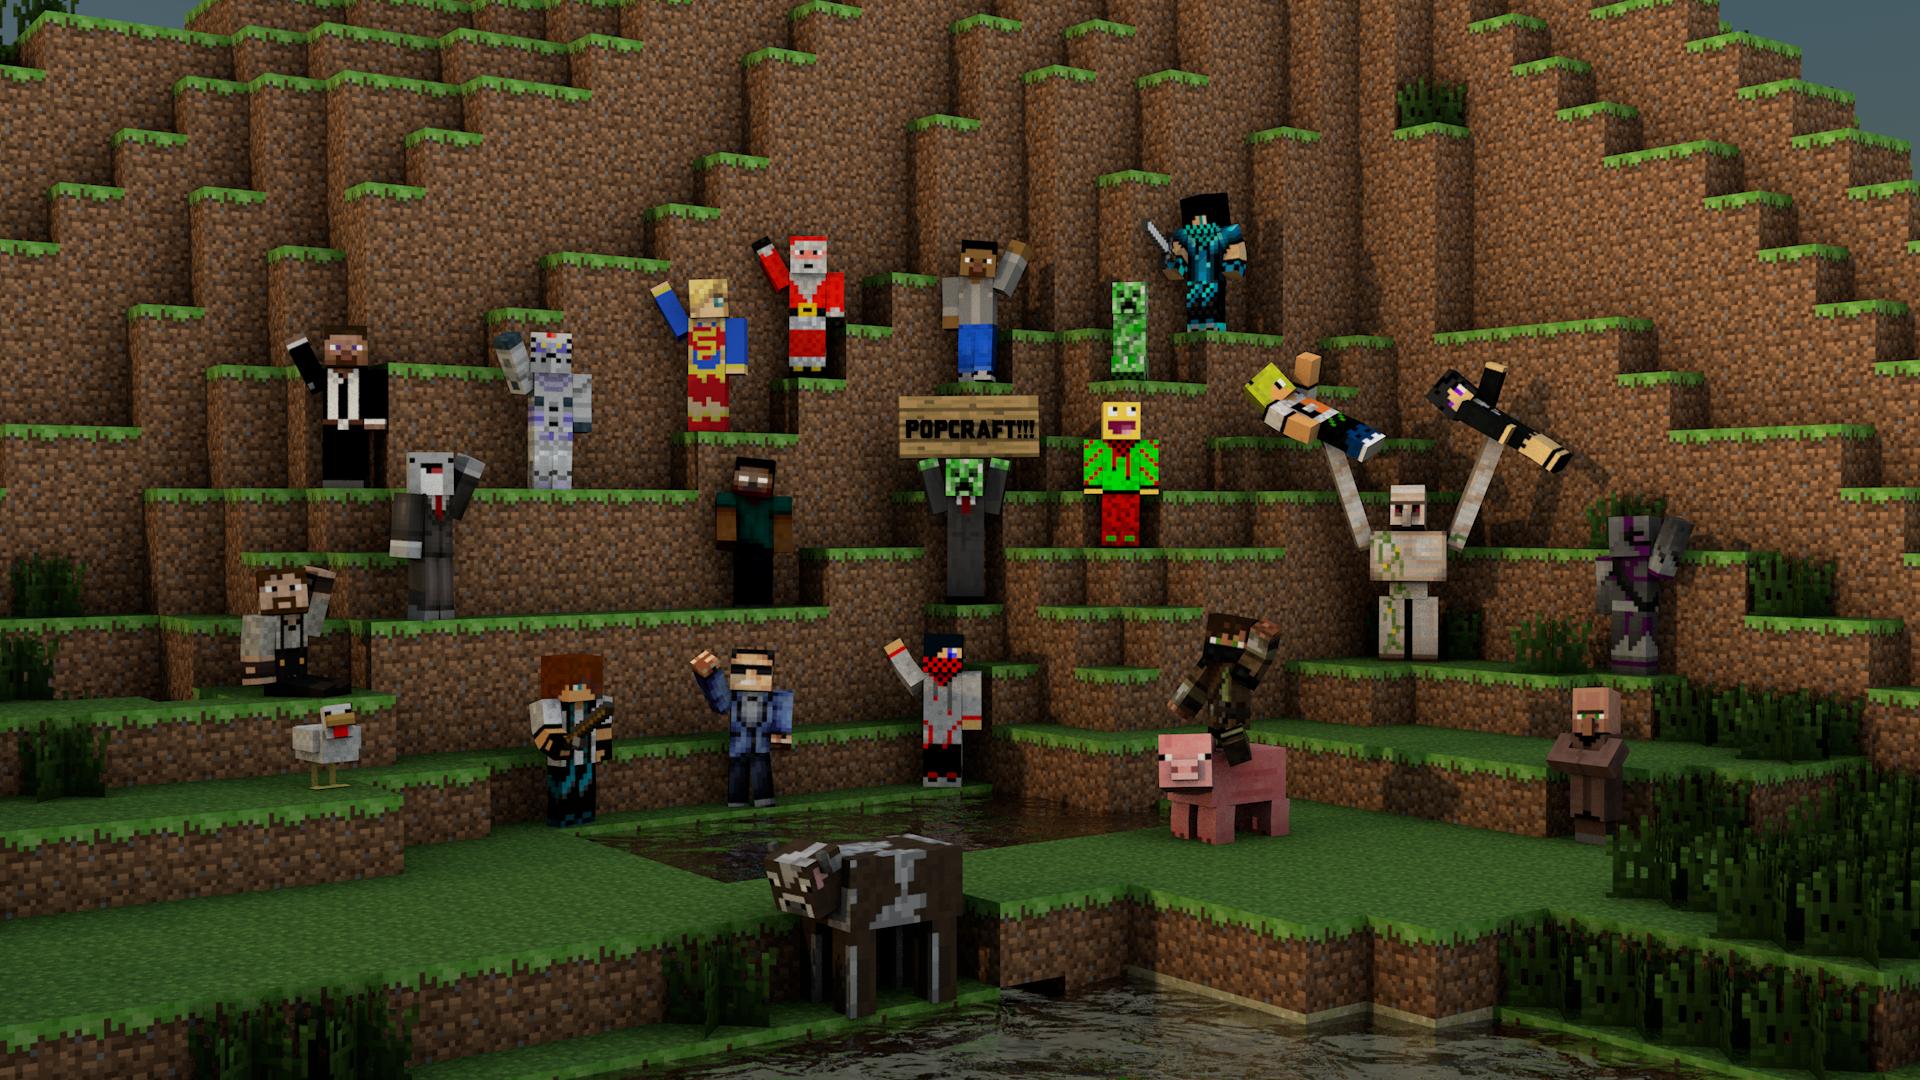 3D HD Minecraft Wallpaper Made With Cinema 4D And Photohop CS6